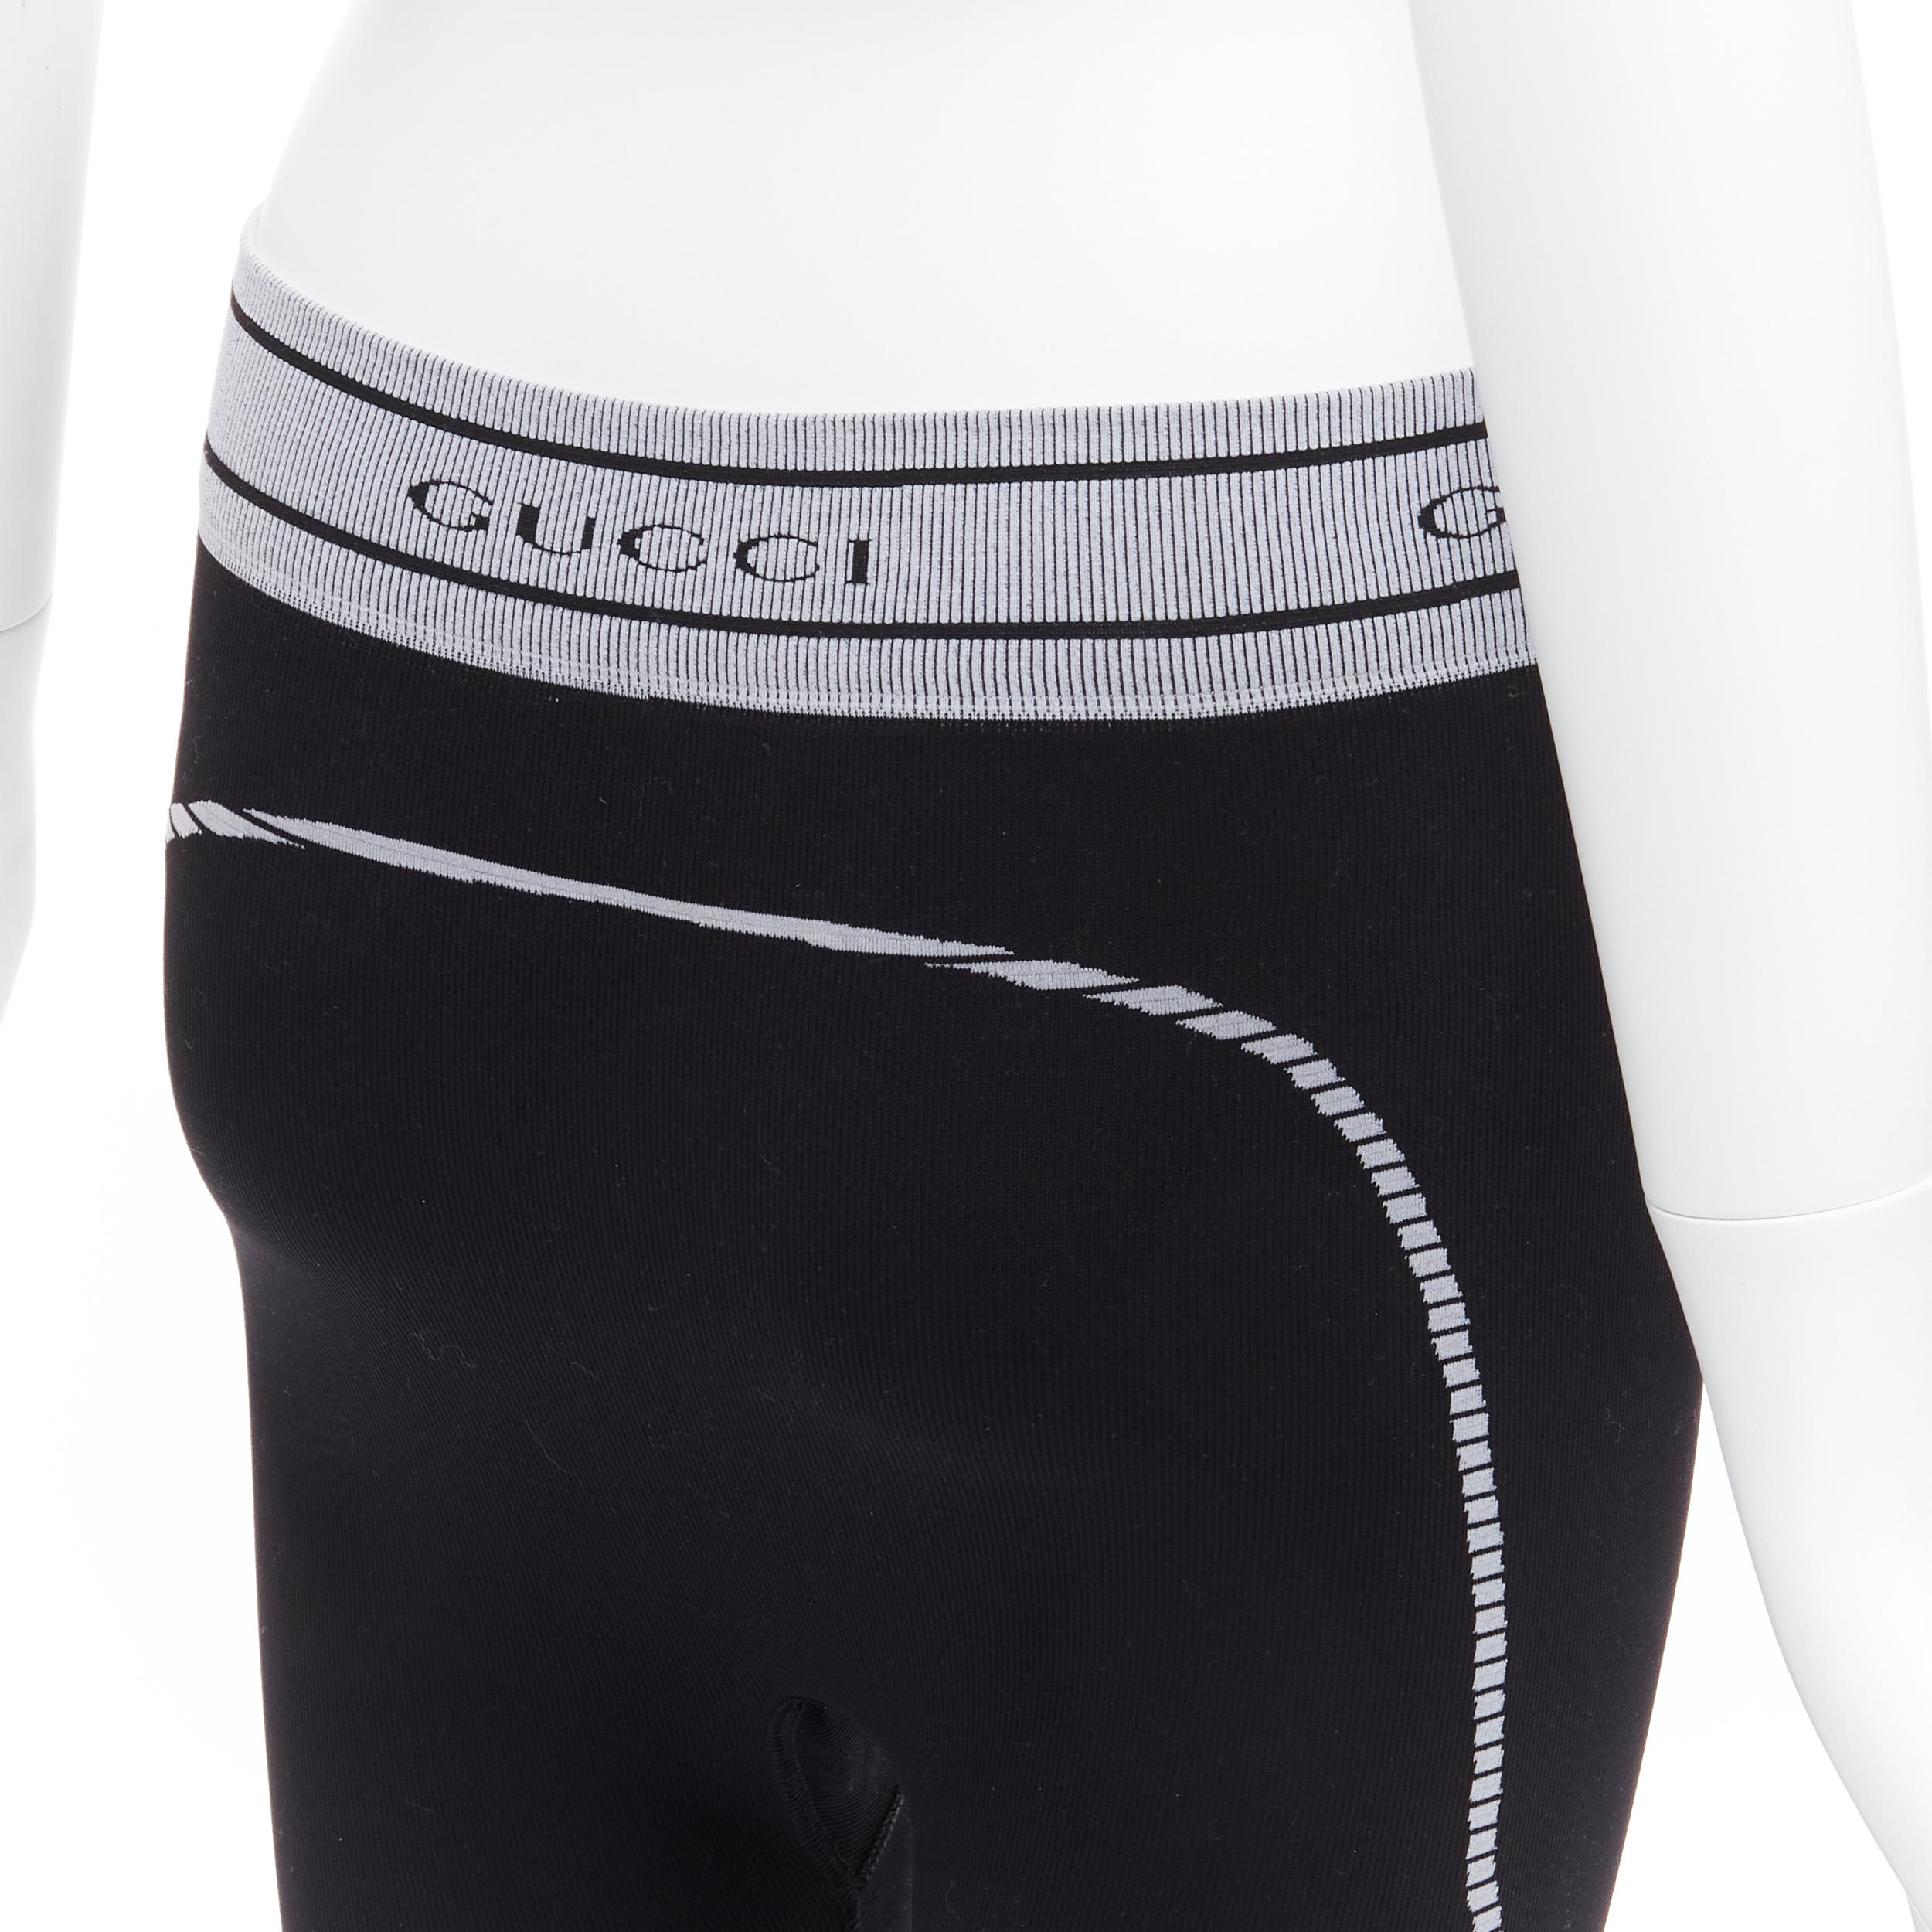 rare GUCCI Vintage Tom Ford grey GG logo ribbed trim contour seam biker leggings pants S
Reference: TGAS/D00220
Brand: Gucci
Designer: Tom Ford
Material: Fabric
Color: Black, Grey
Pattern: Solid
Closure: Elasticated

CONDITION:
Condition: Excellent,